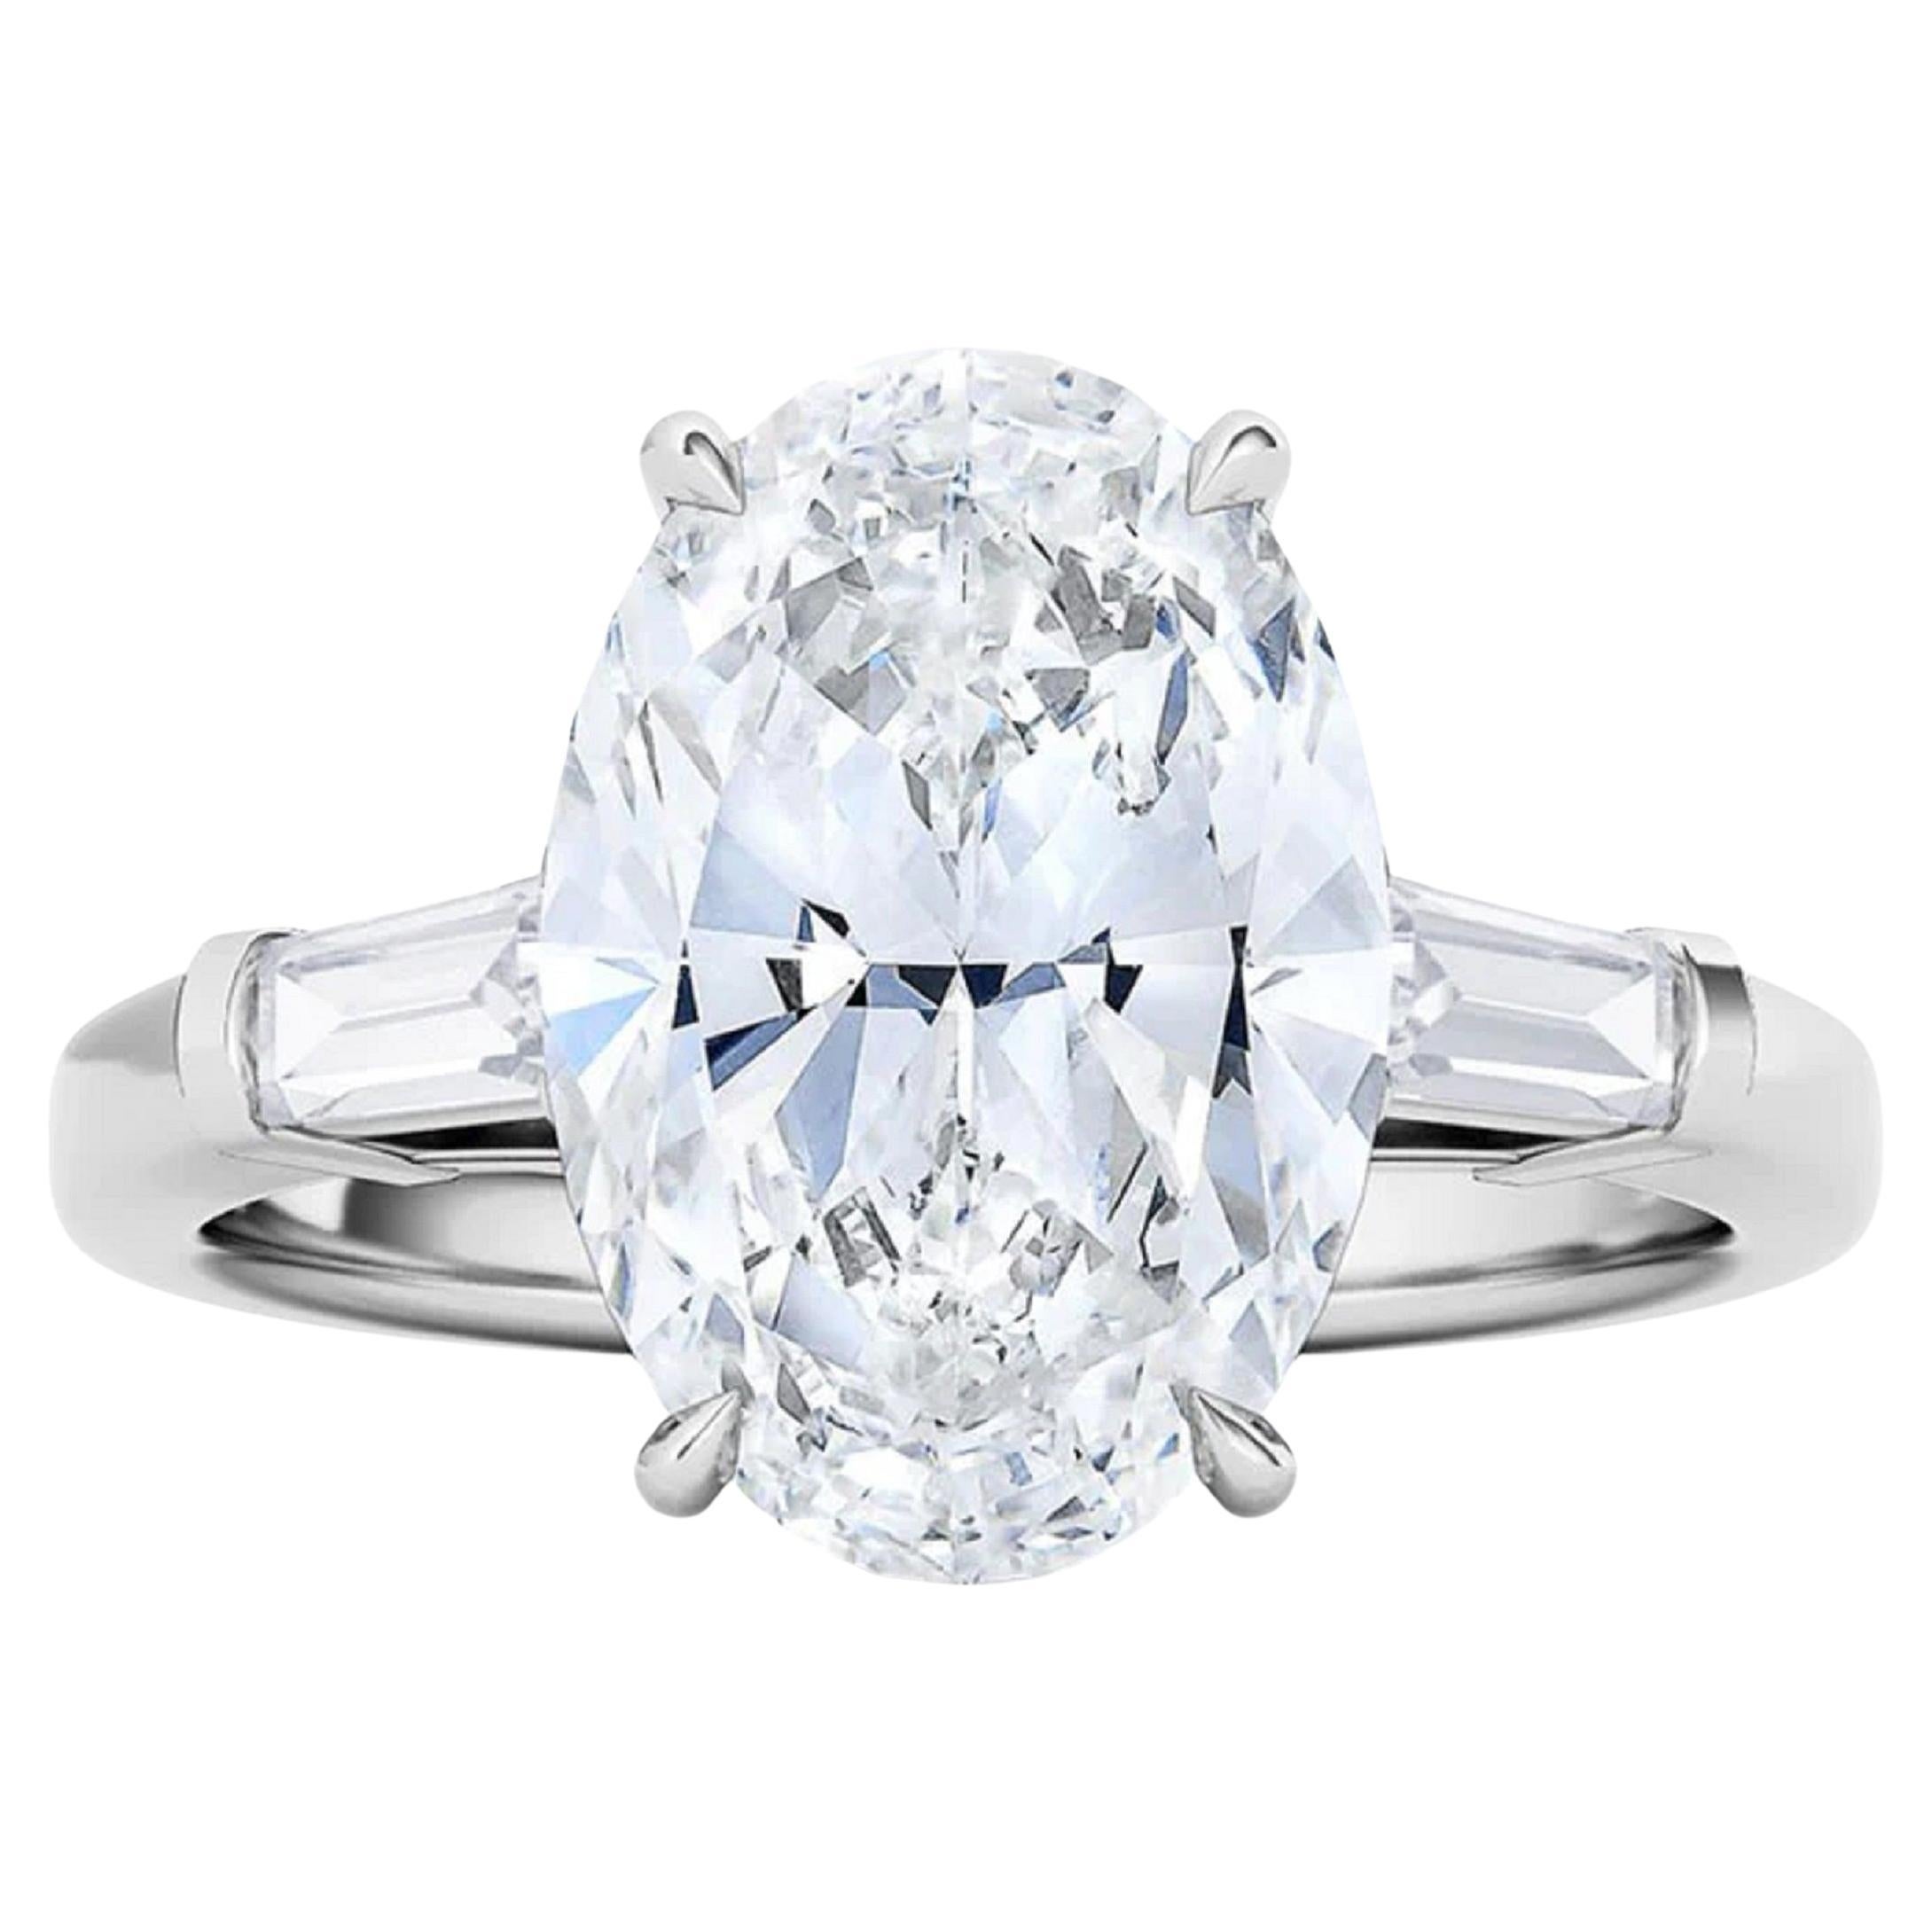 GIA Certified 3 Carat Oval Baguette Diamond Ring